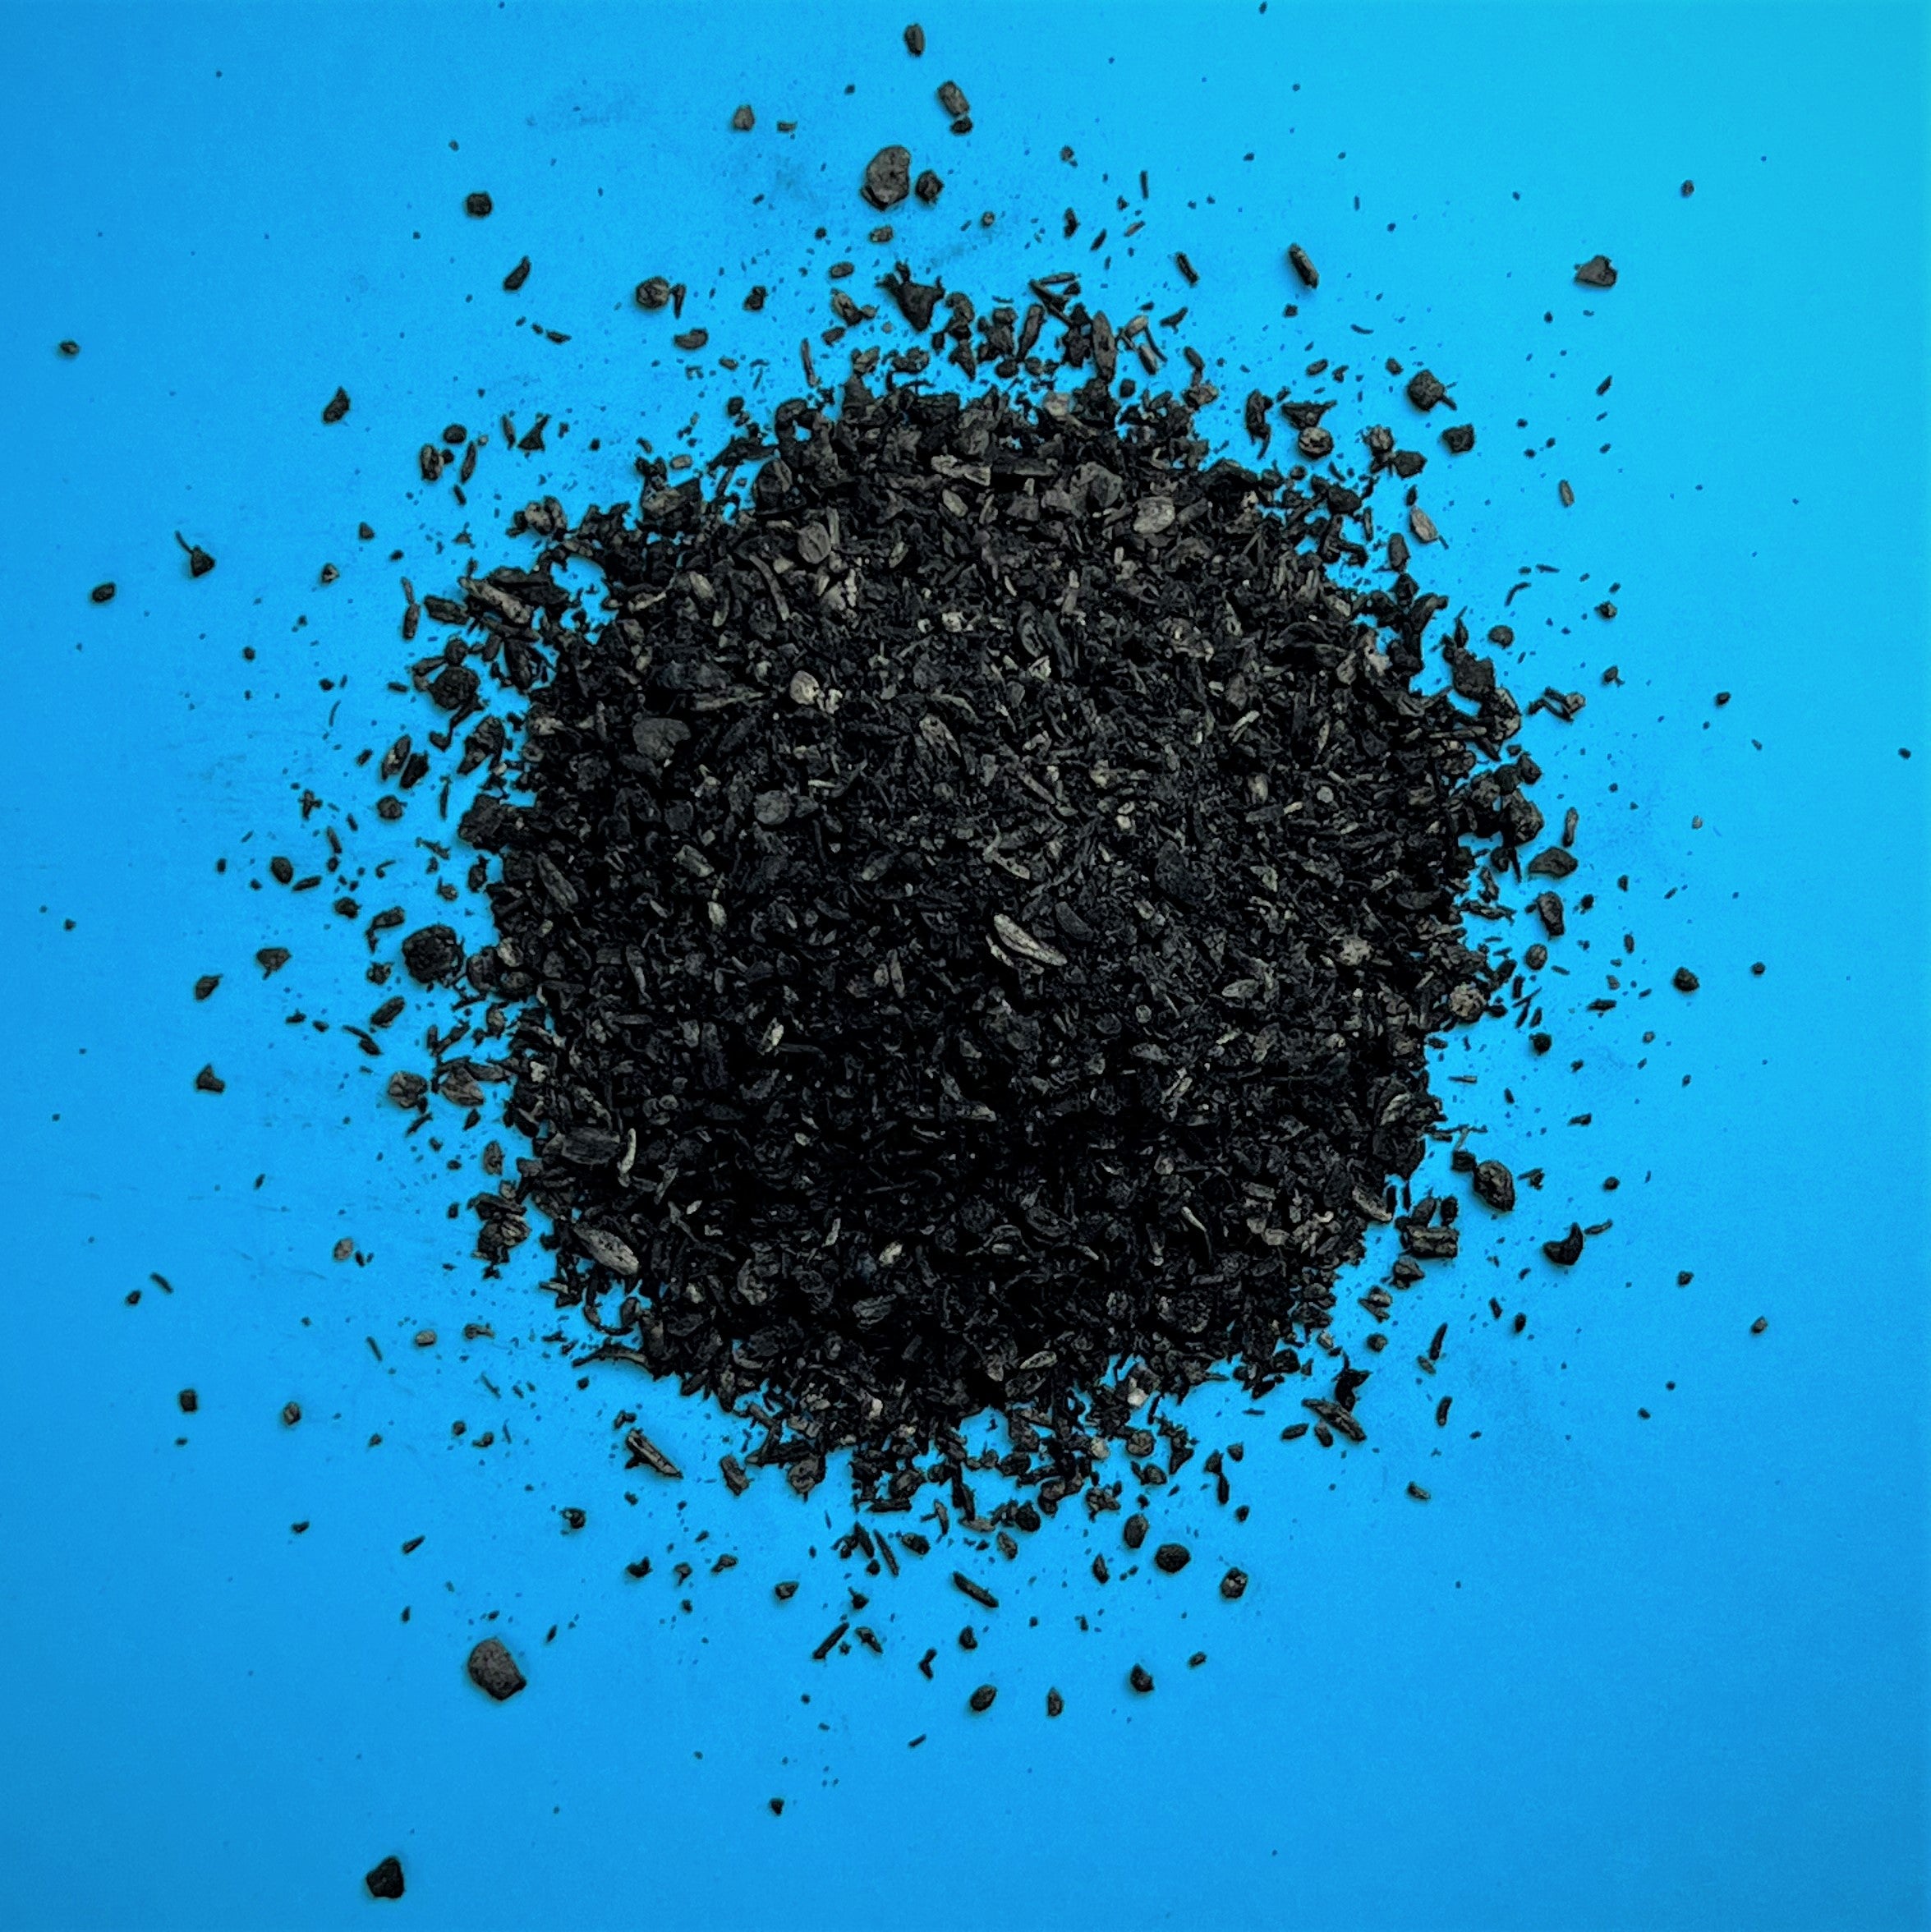 Wholesale Horticultural Charcoal